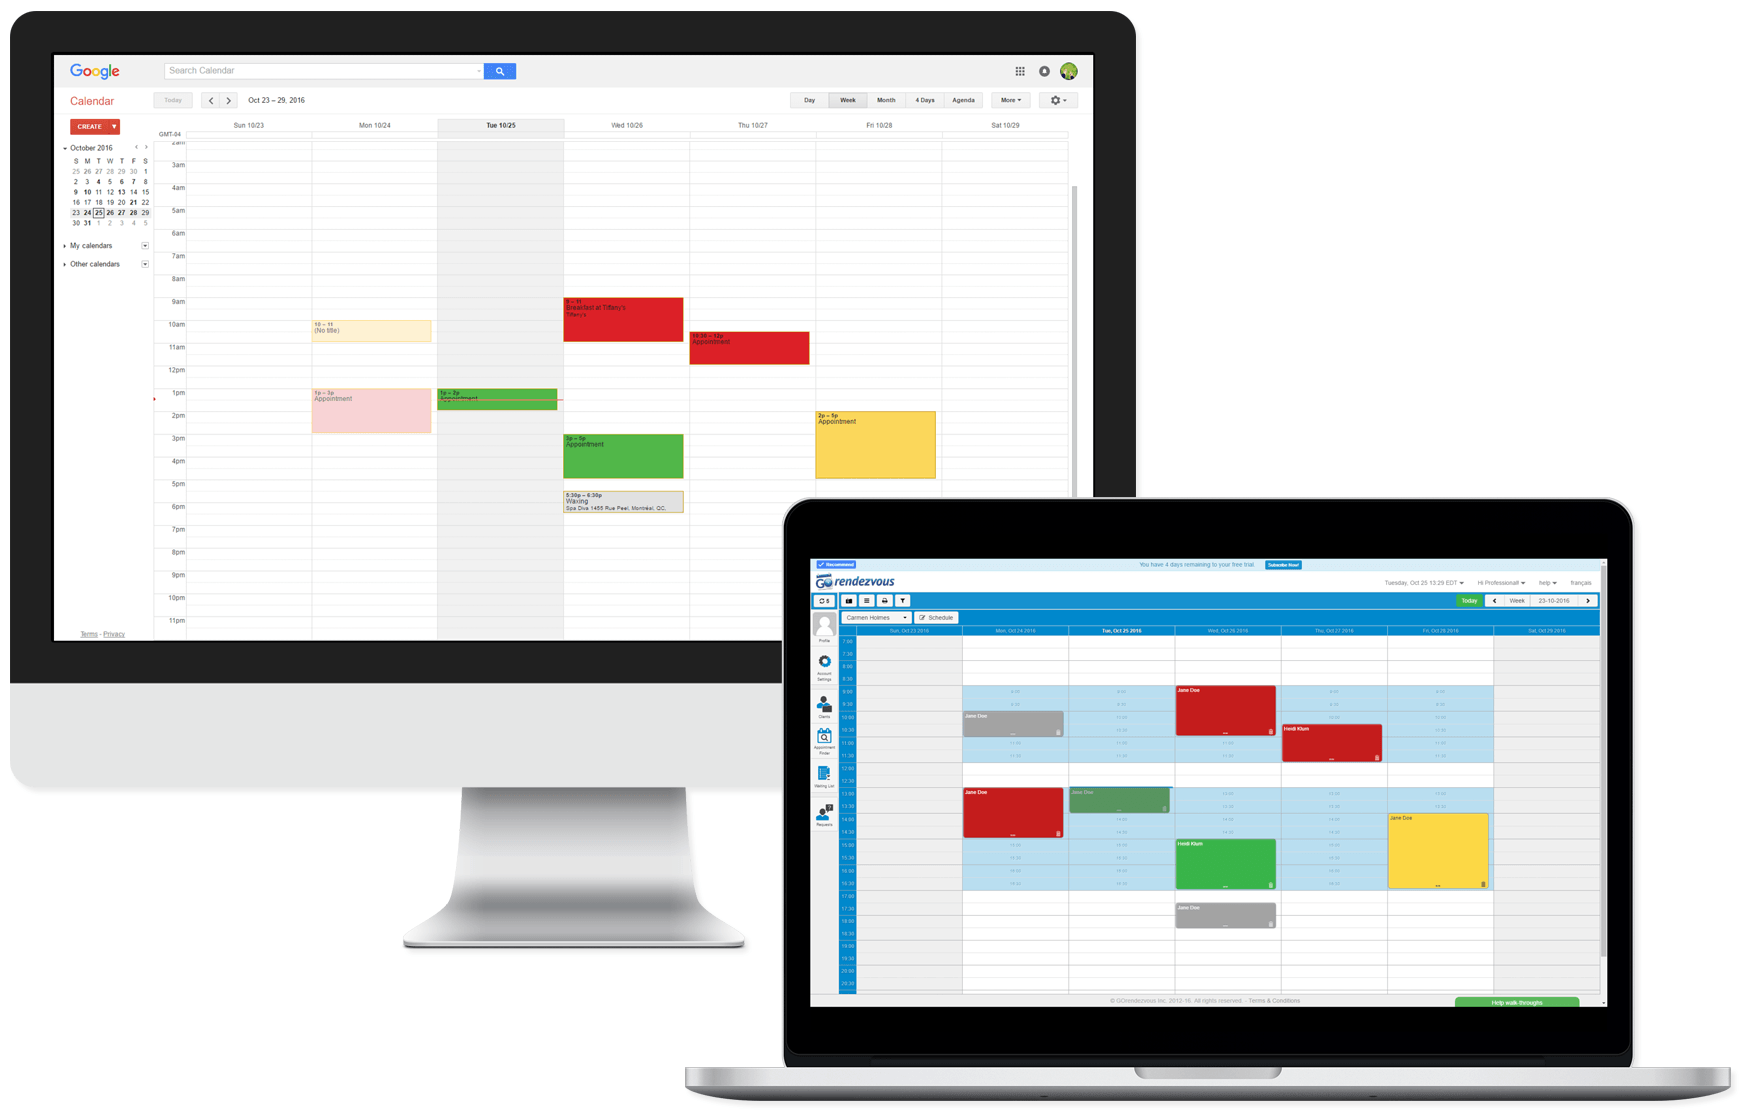 GOrendezvous's scheduling view next to a google calendar with the same schedule